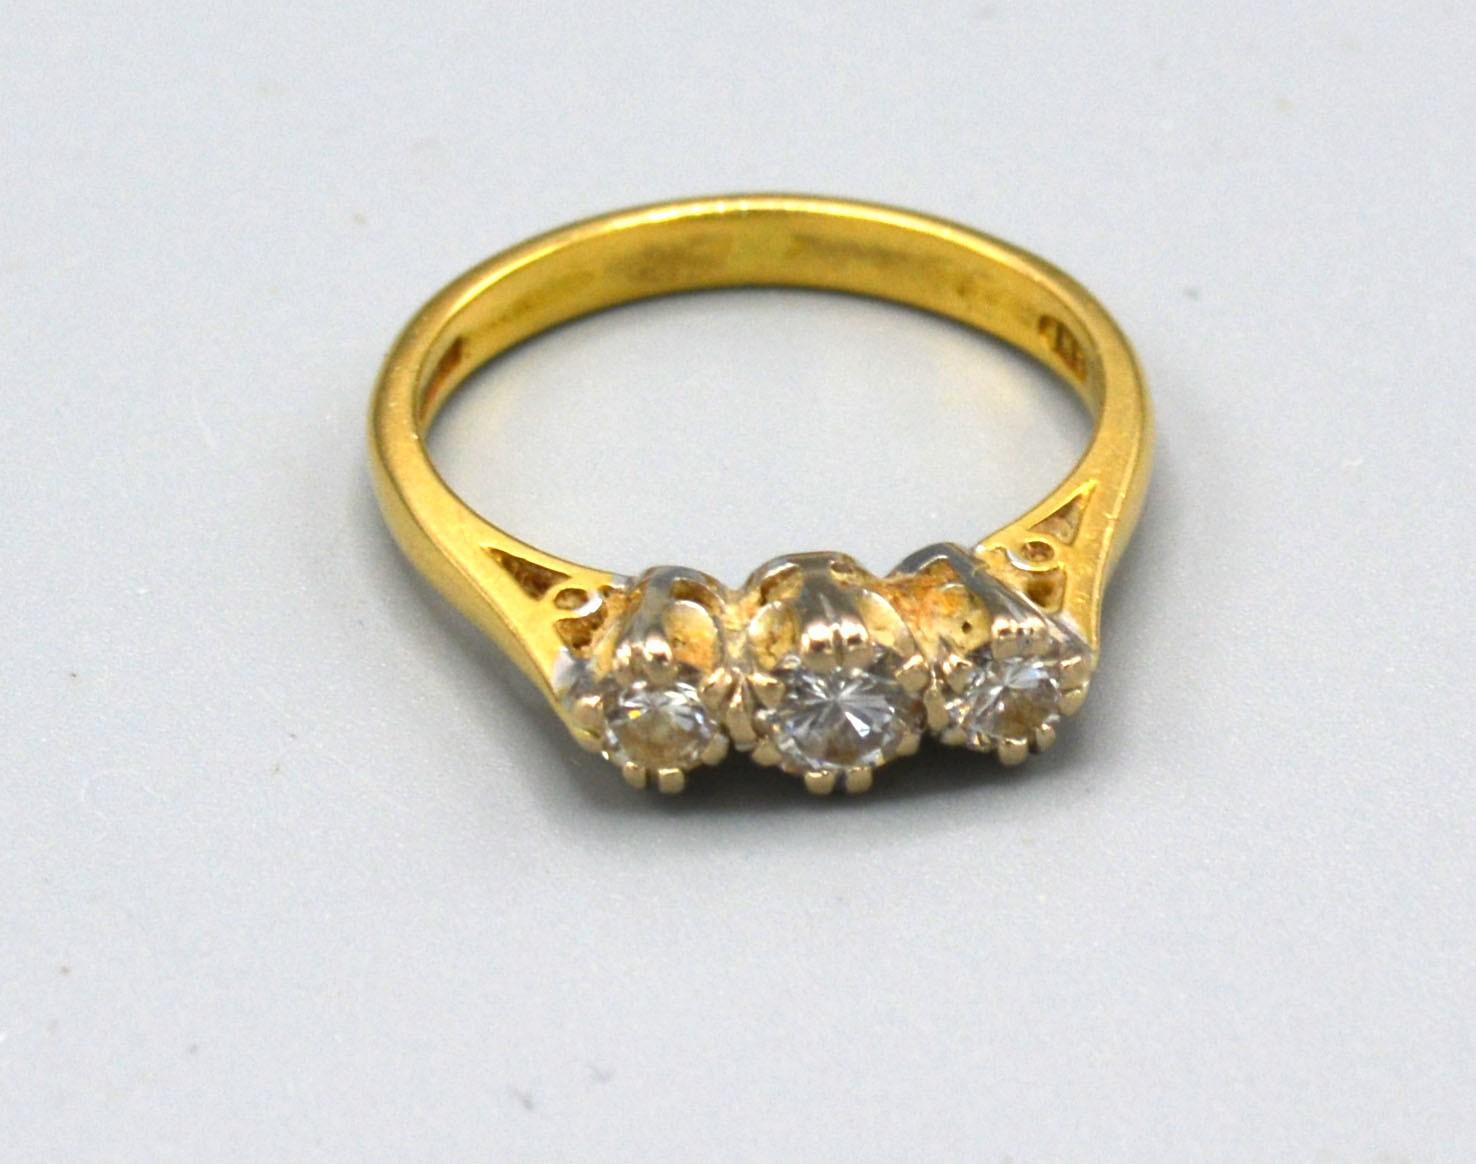 An 18ct. Gold Three Stone Diamond Ring claw set, 3.2 gms ring size L